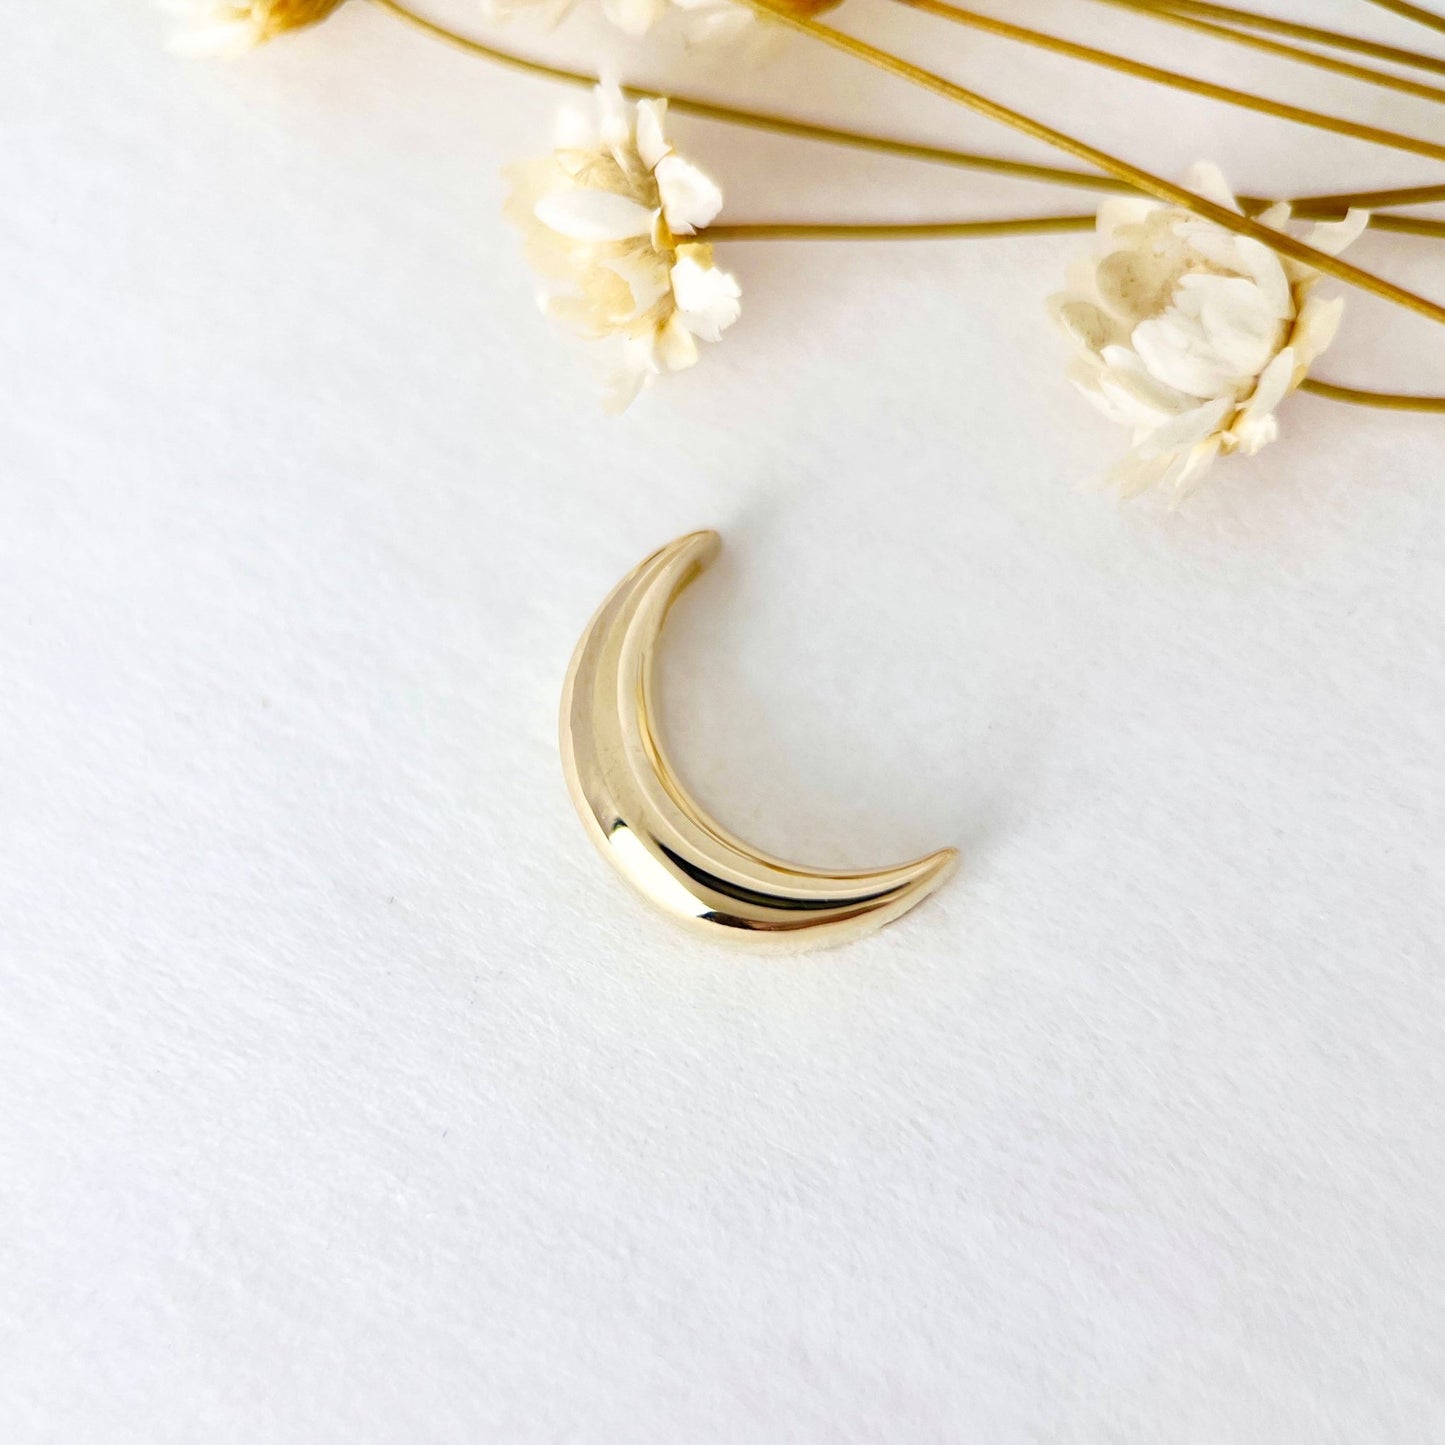 9K Solid Gold Moon Charm Pendant Necklace